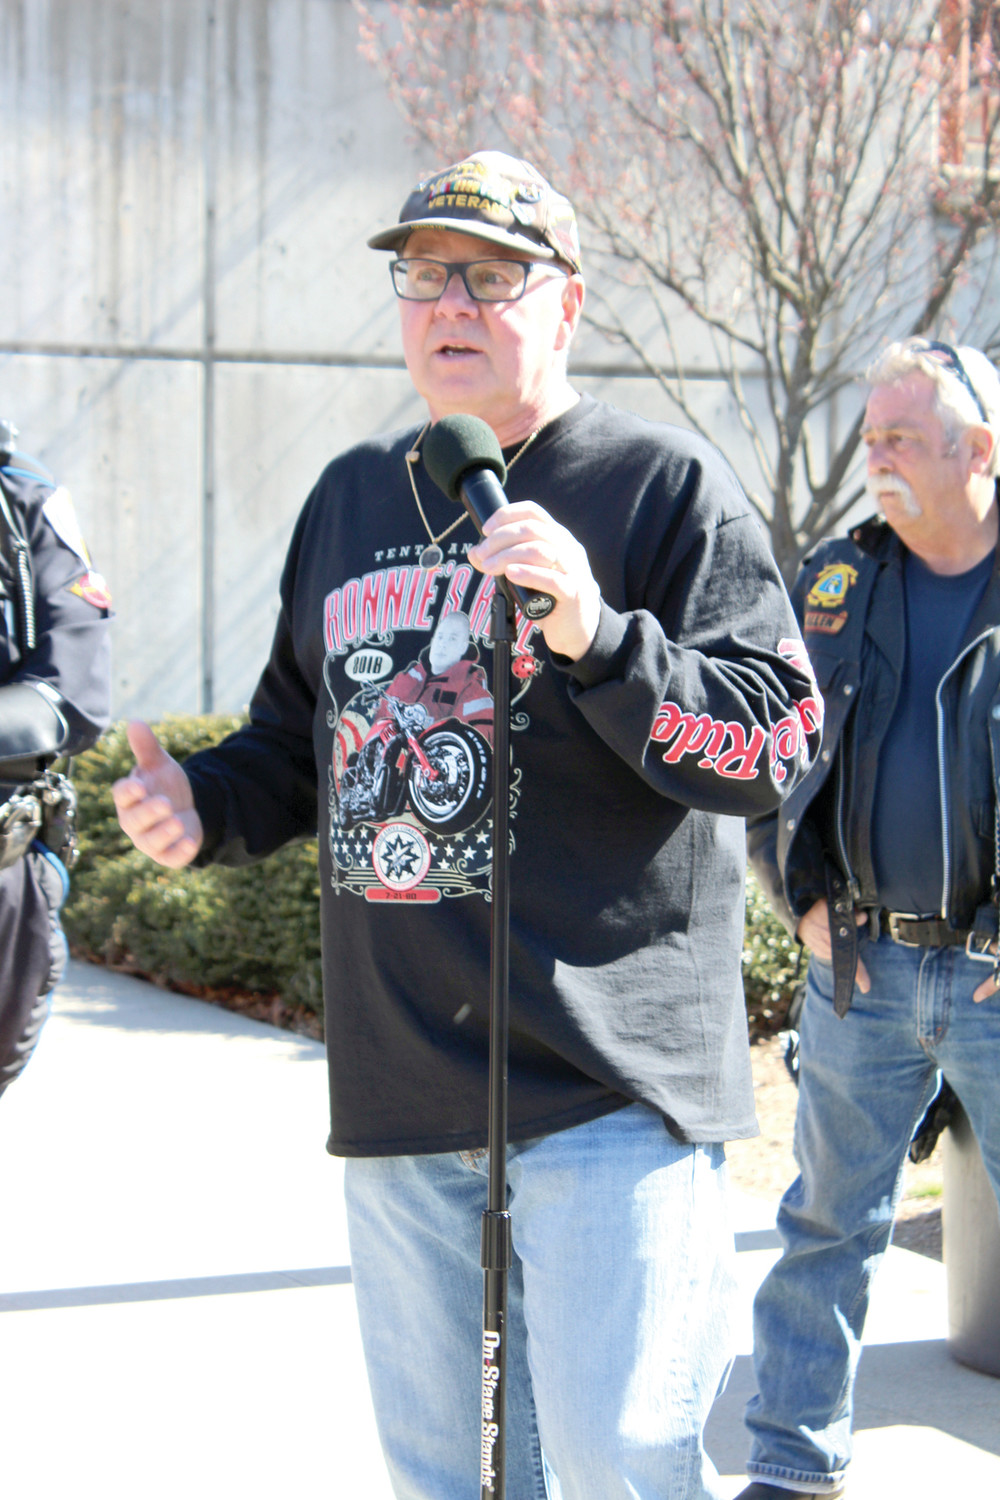 THANKFUL FOR THEIR SUPPORT: Ron Gill Sr., thanked everyone for coming to this year’s Tenth Annual Ronnie’s Ride, which boasted 300 participants.